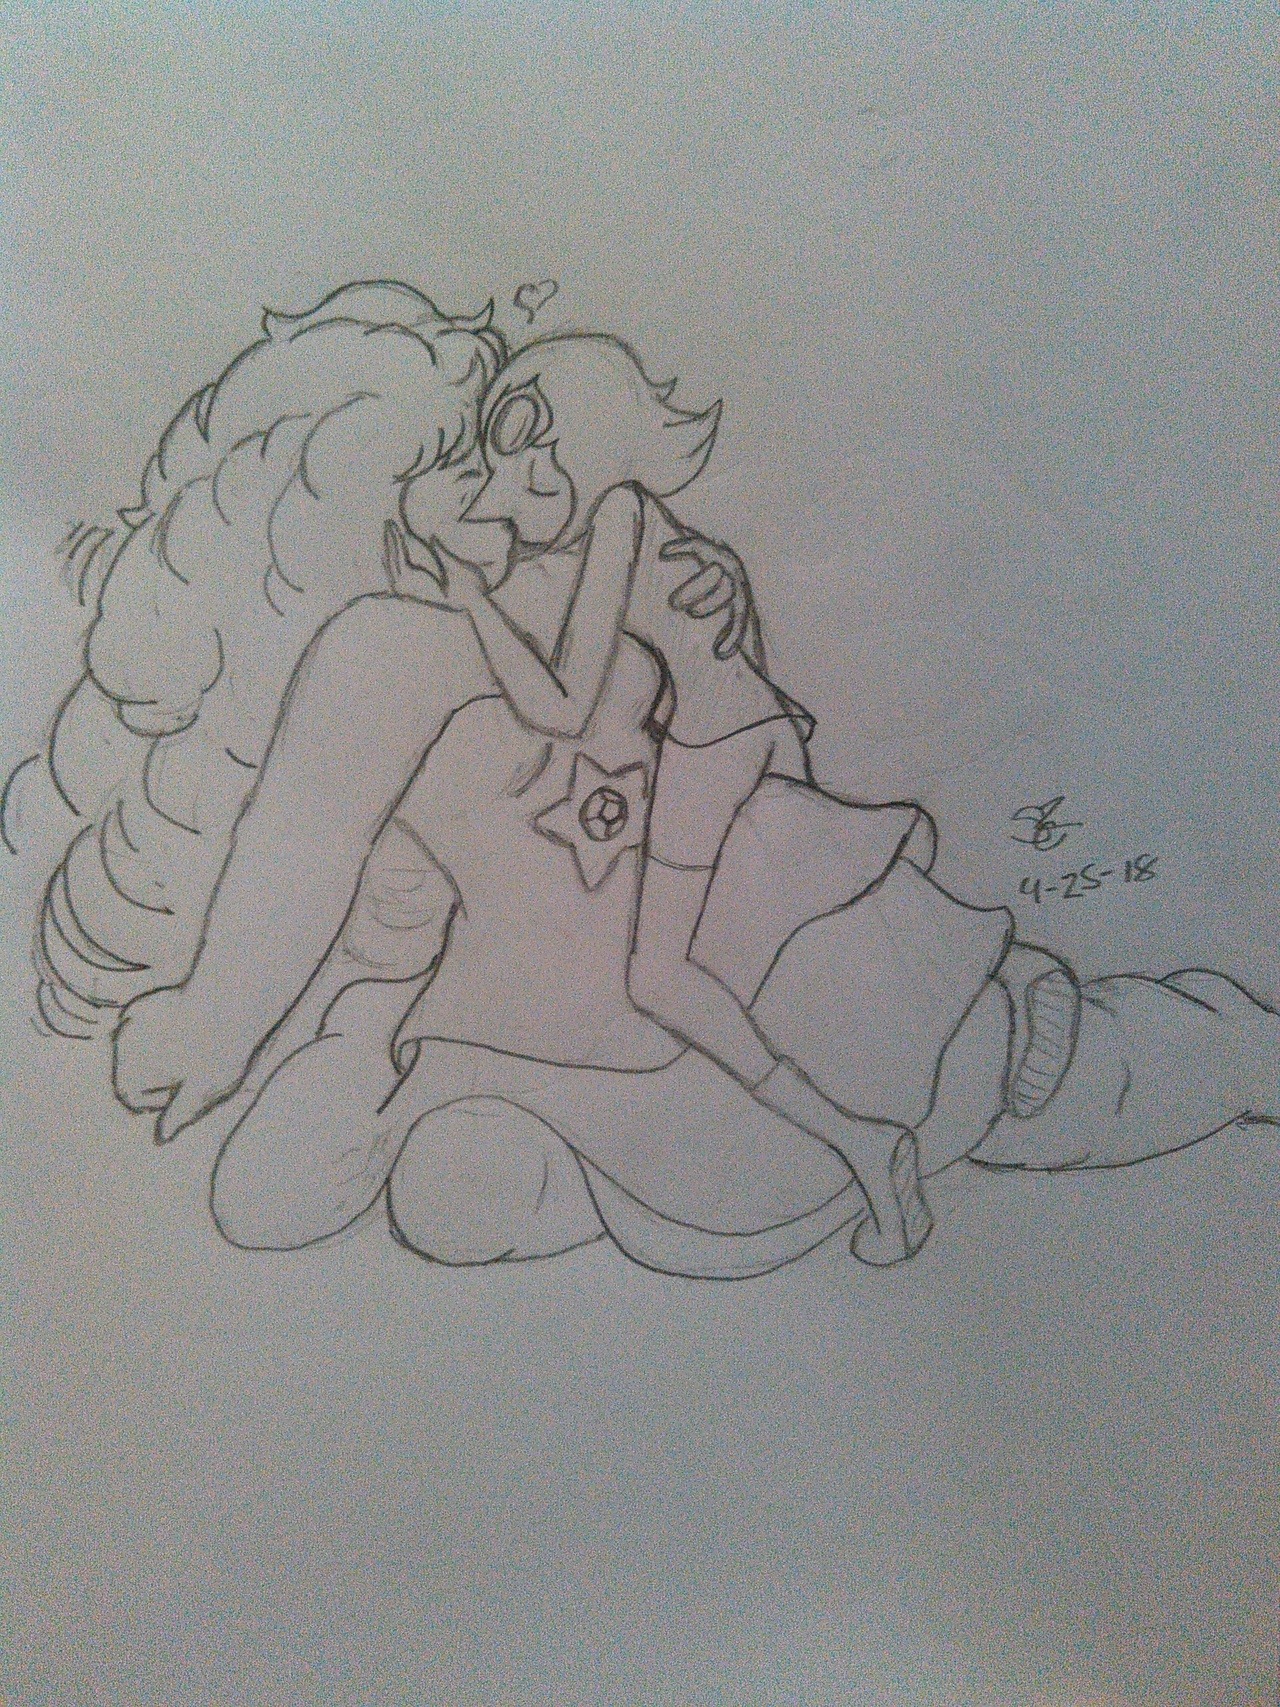 Since I decided to embrace Pearlrose as my otp, I’ve noticed that there’s a severe lack of Pearlrose content, so I made some myself.